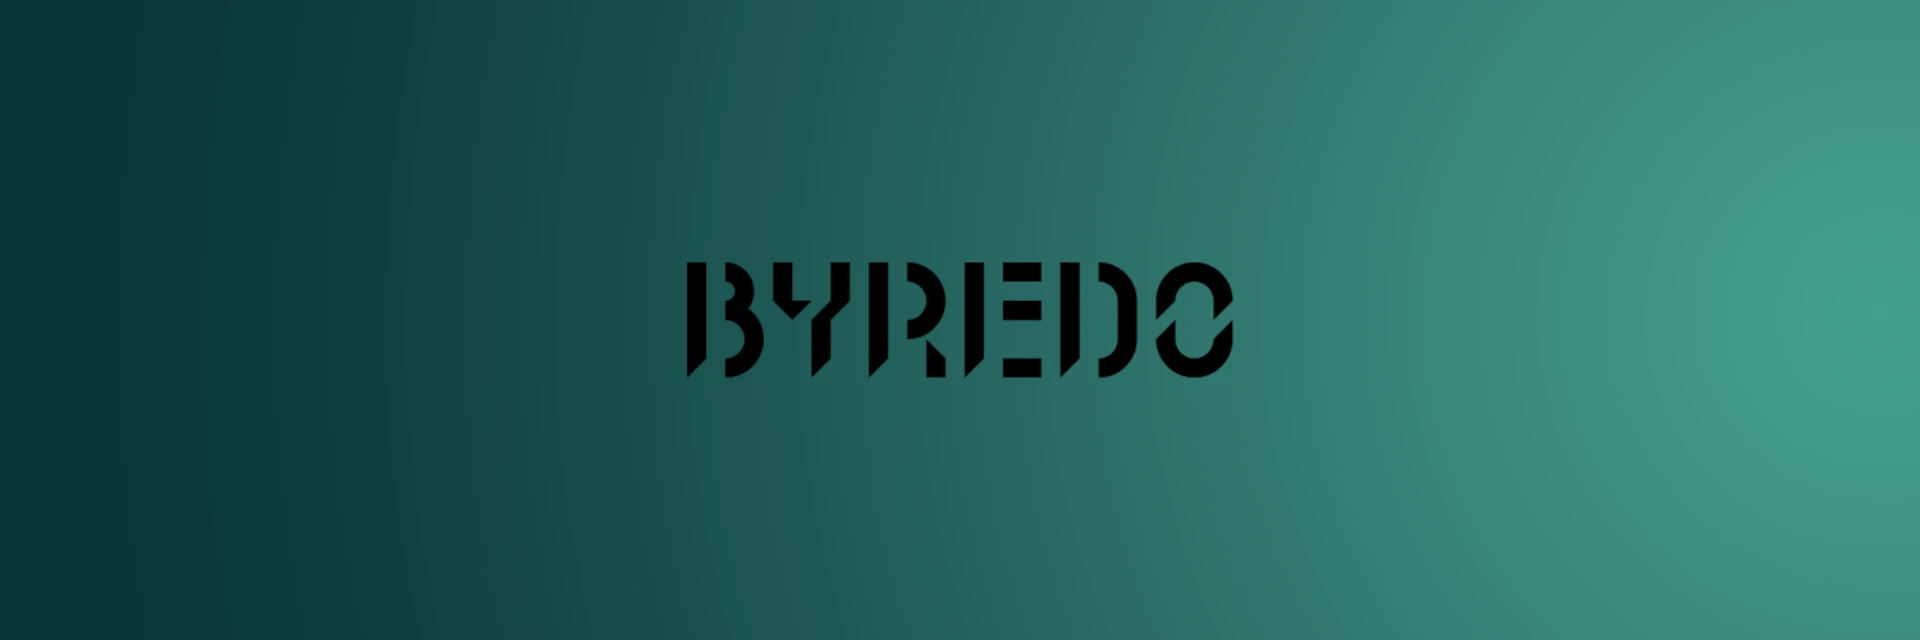 A banner image for Byredo perfumes brand